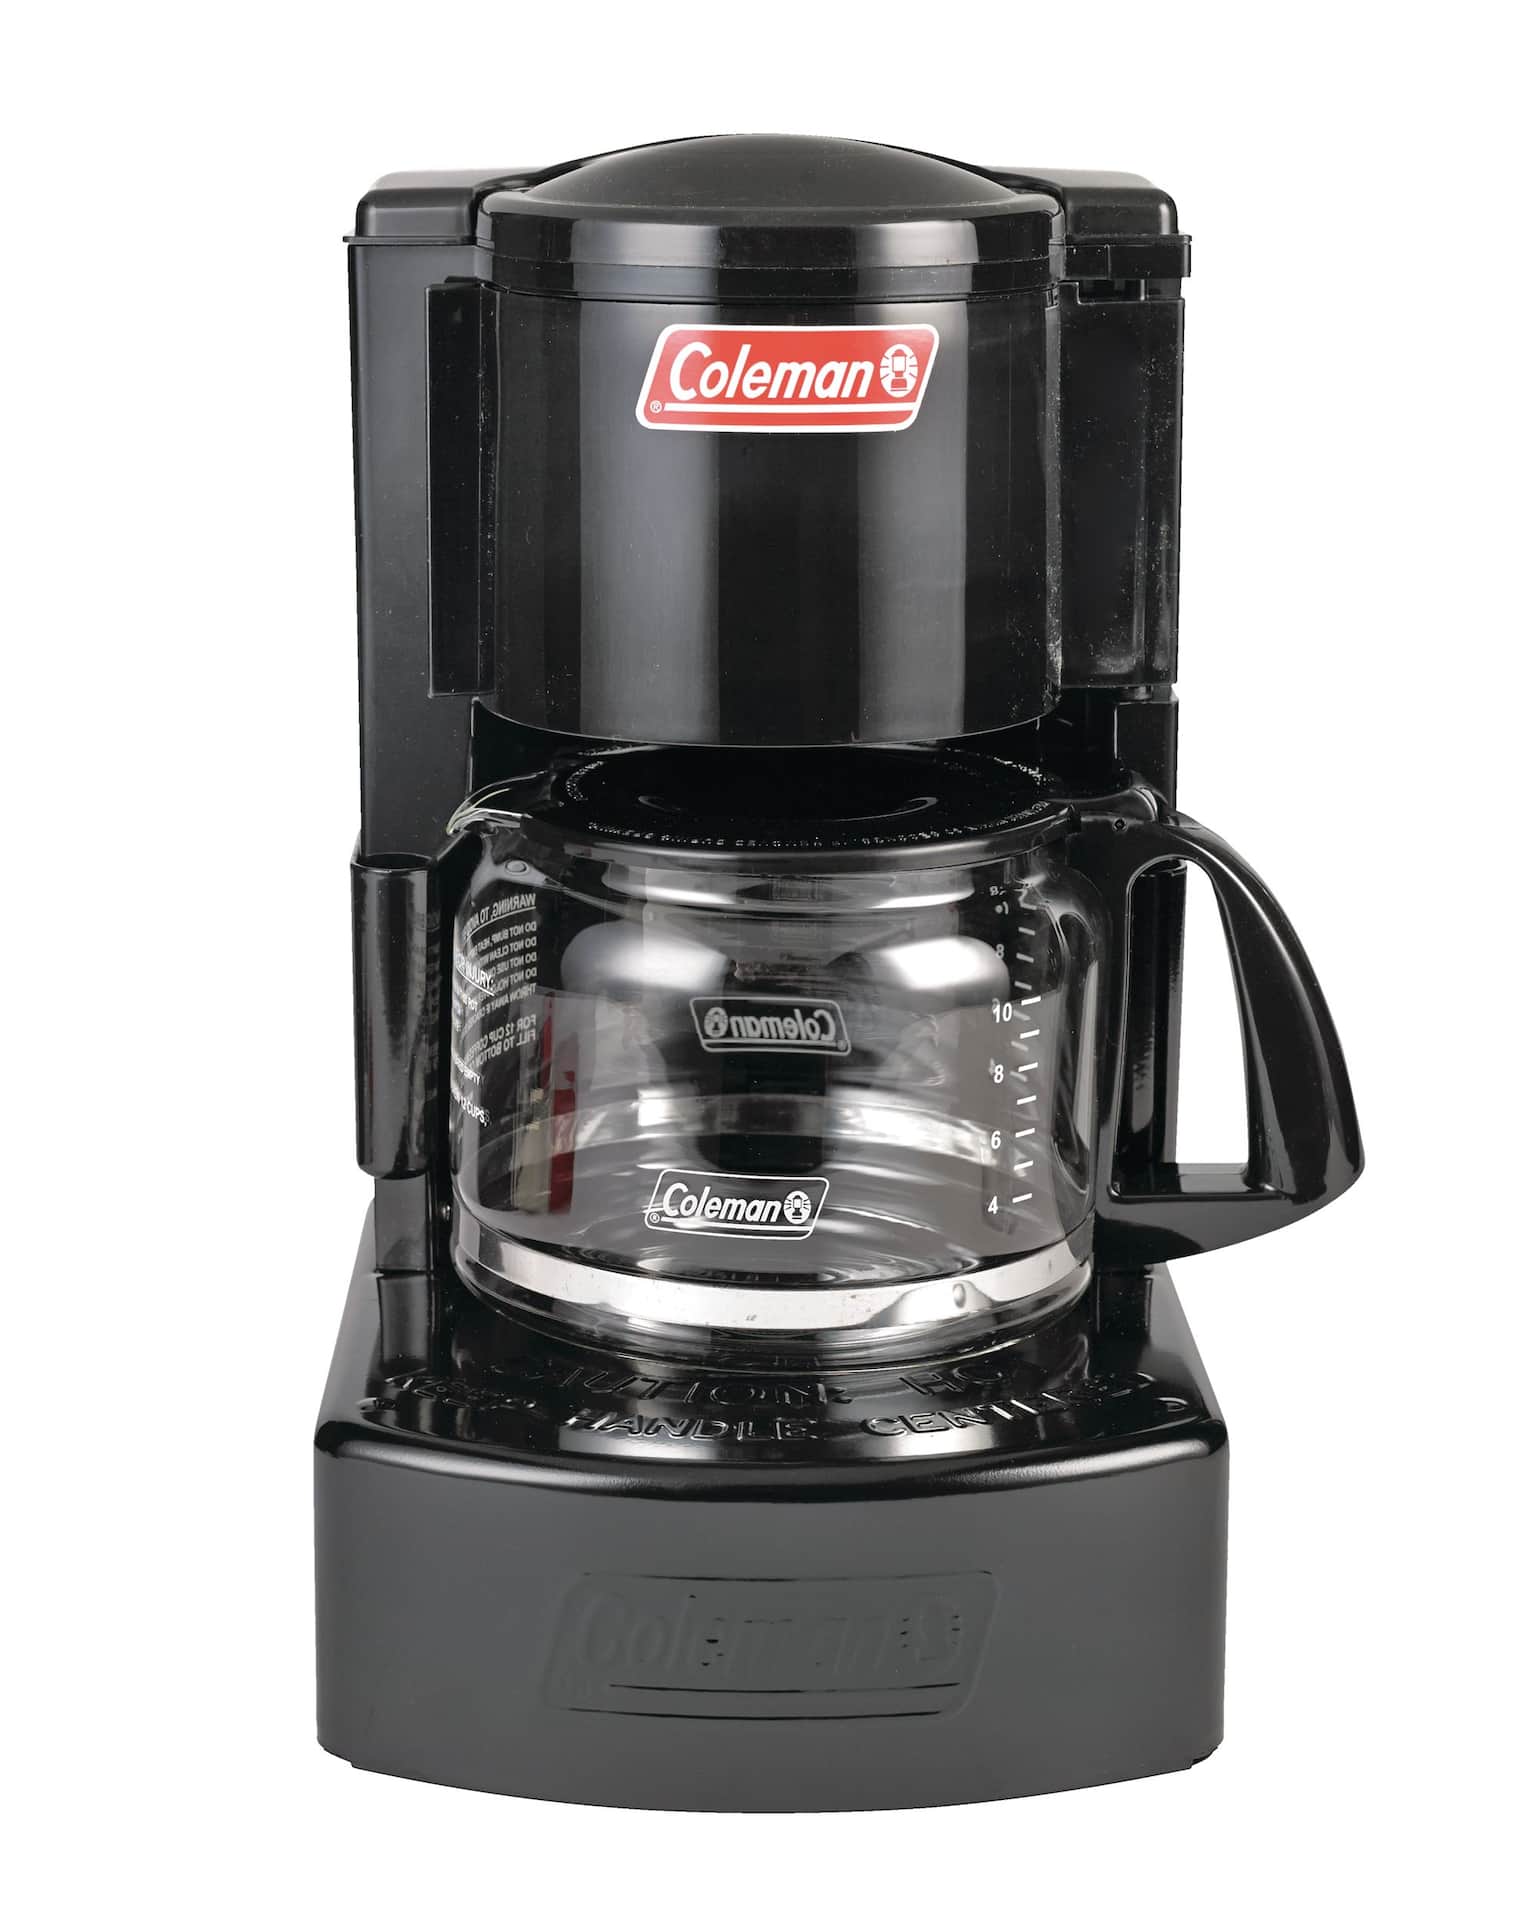 https://media-www.canadiantire.ca/product/playing/camping/camping-living/0762627/coleman-coffee-maker-a3c8e24a-8782-4ff1-8b79-1d5594d1a913-jpgrendition.jpg